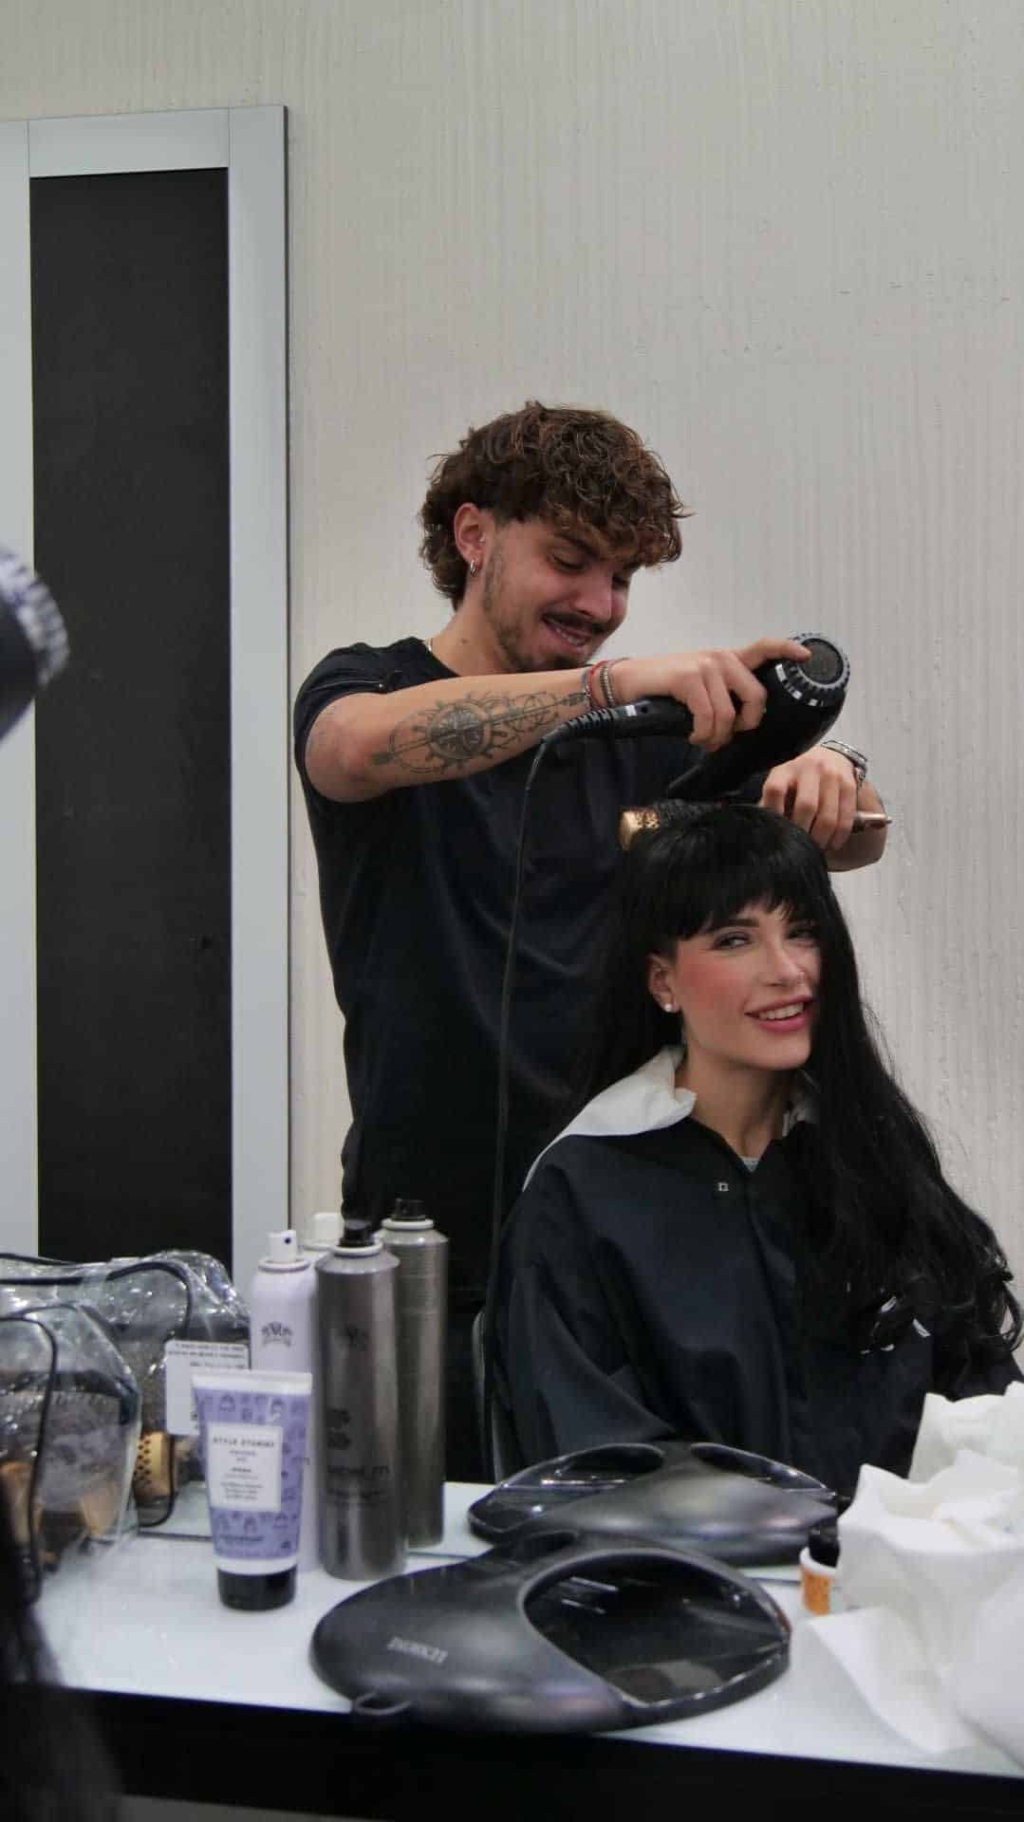 A hairdresser styles the hair of a model.